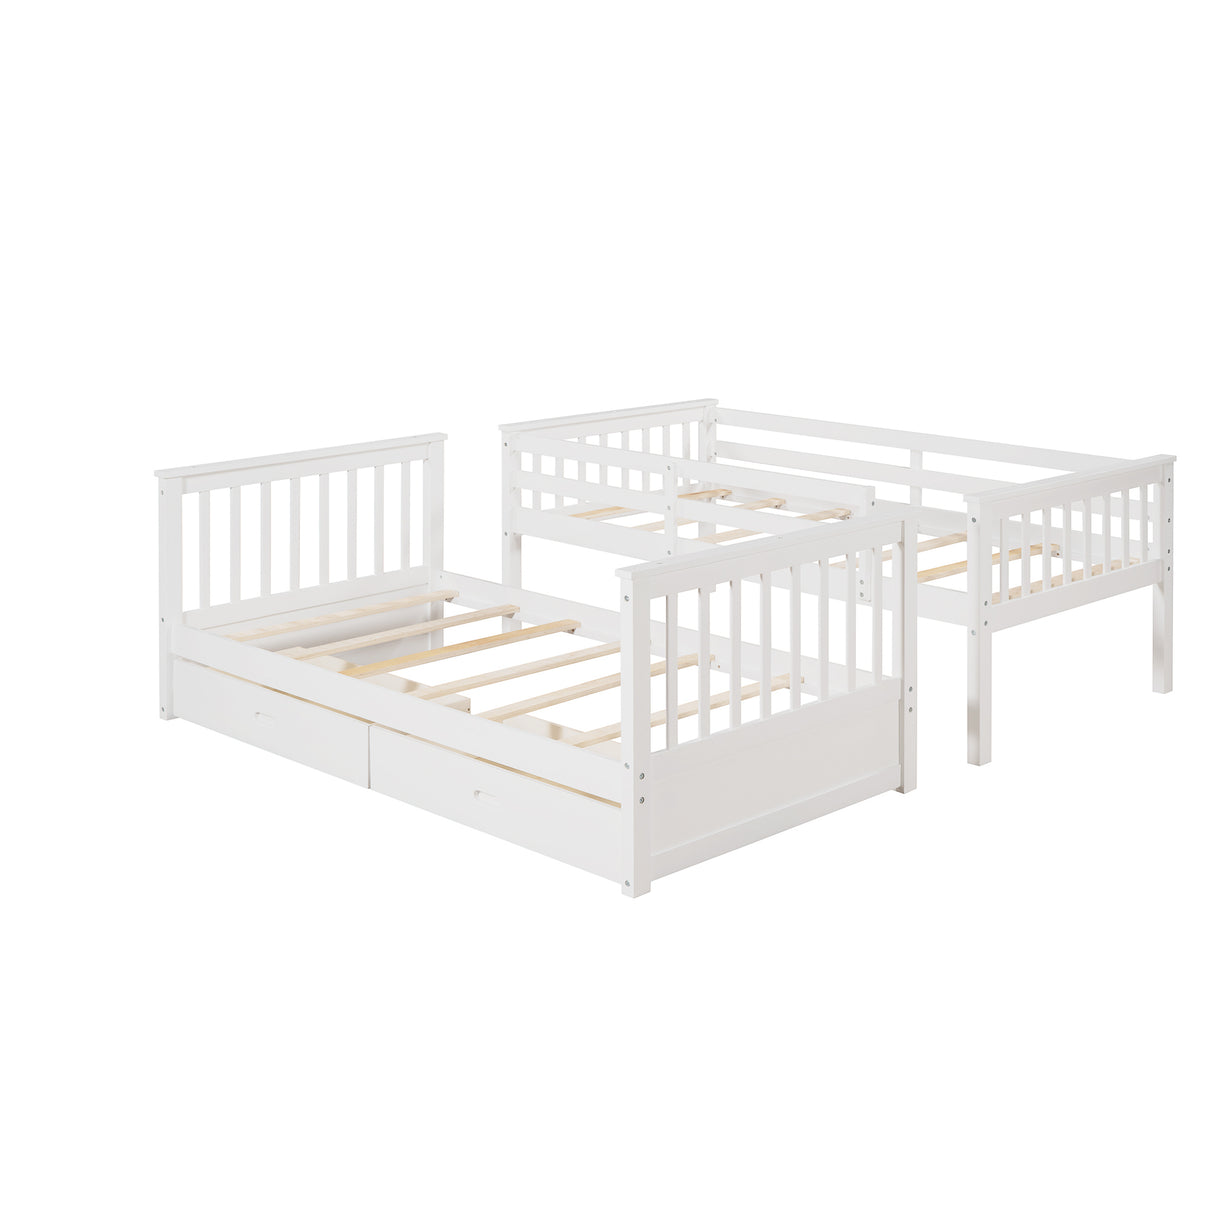 Twin-Over-Twin Bunk Bed with Ladders and Two Storage Drawers (White) - Home Elegance USA